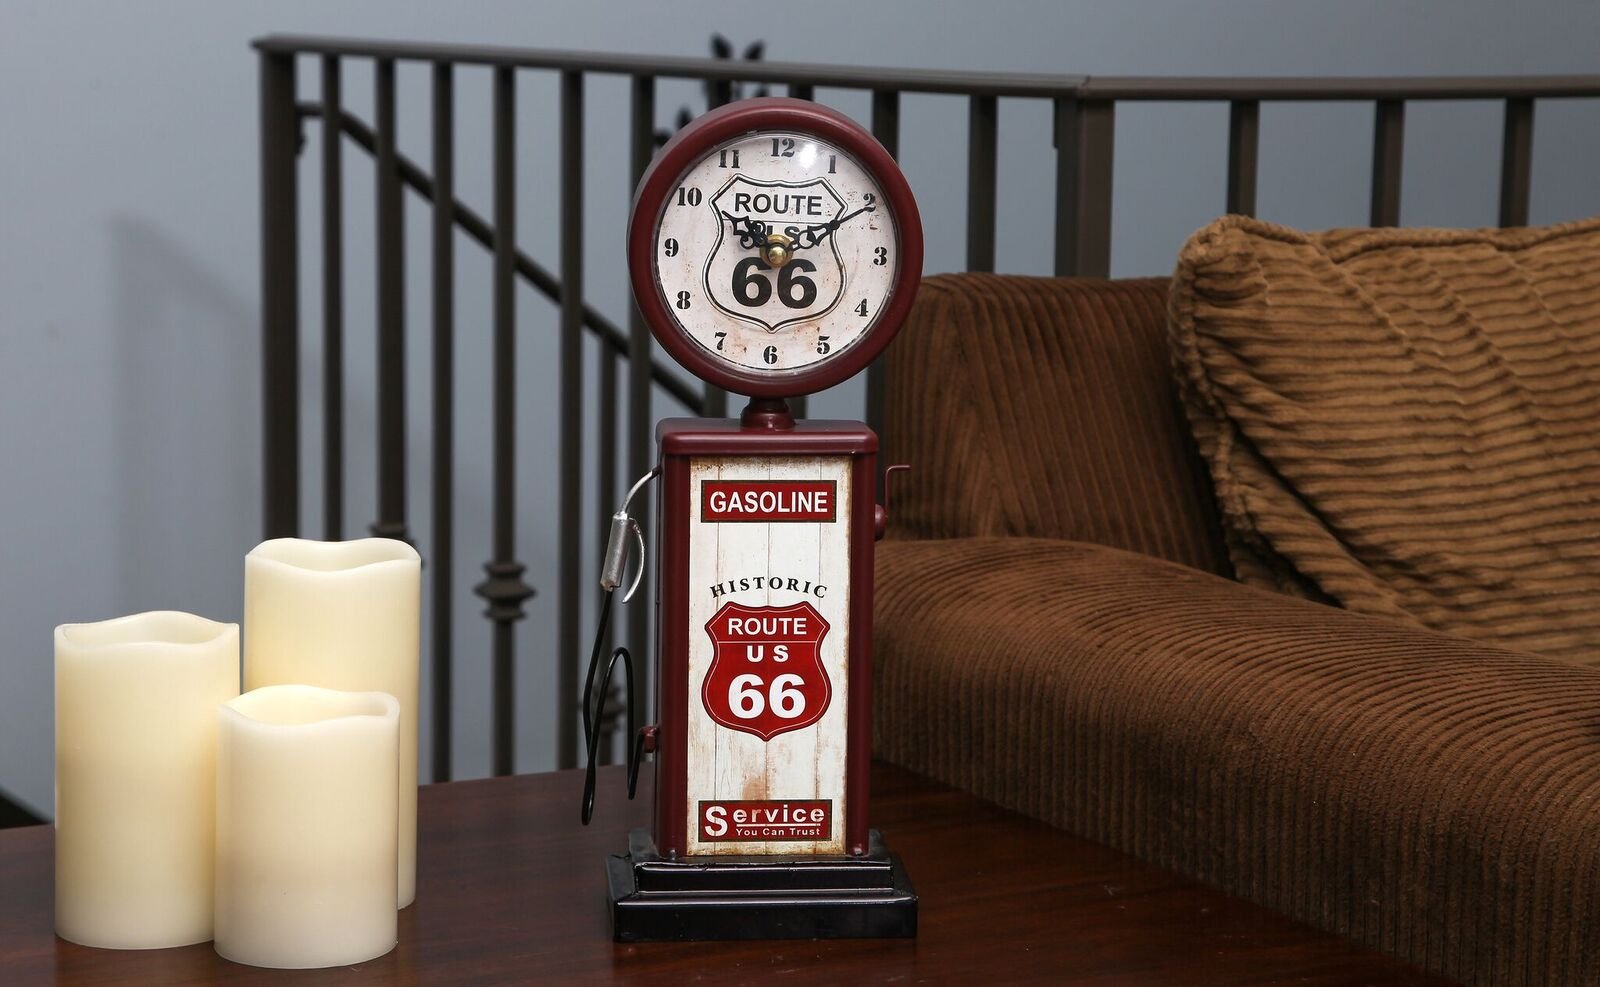 Lily's Home Old Fashioned Route 66 Gas Pump Mantle Clock, Silent-Non-Ticking with Quartz Movement, Makes an Ideal Gift for Antique Sign Collectors, Brown/Red (13 1/2